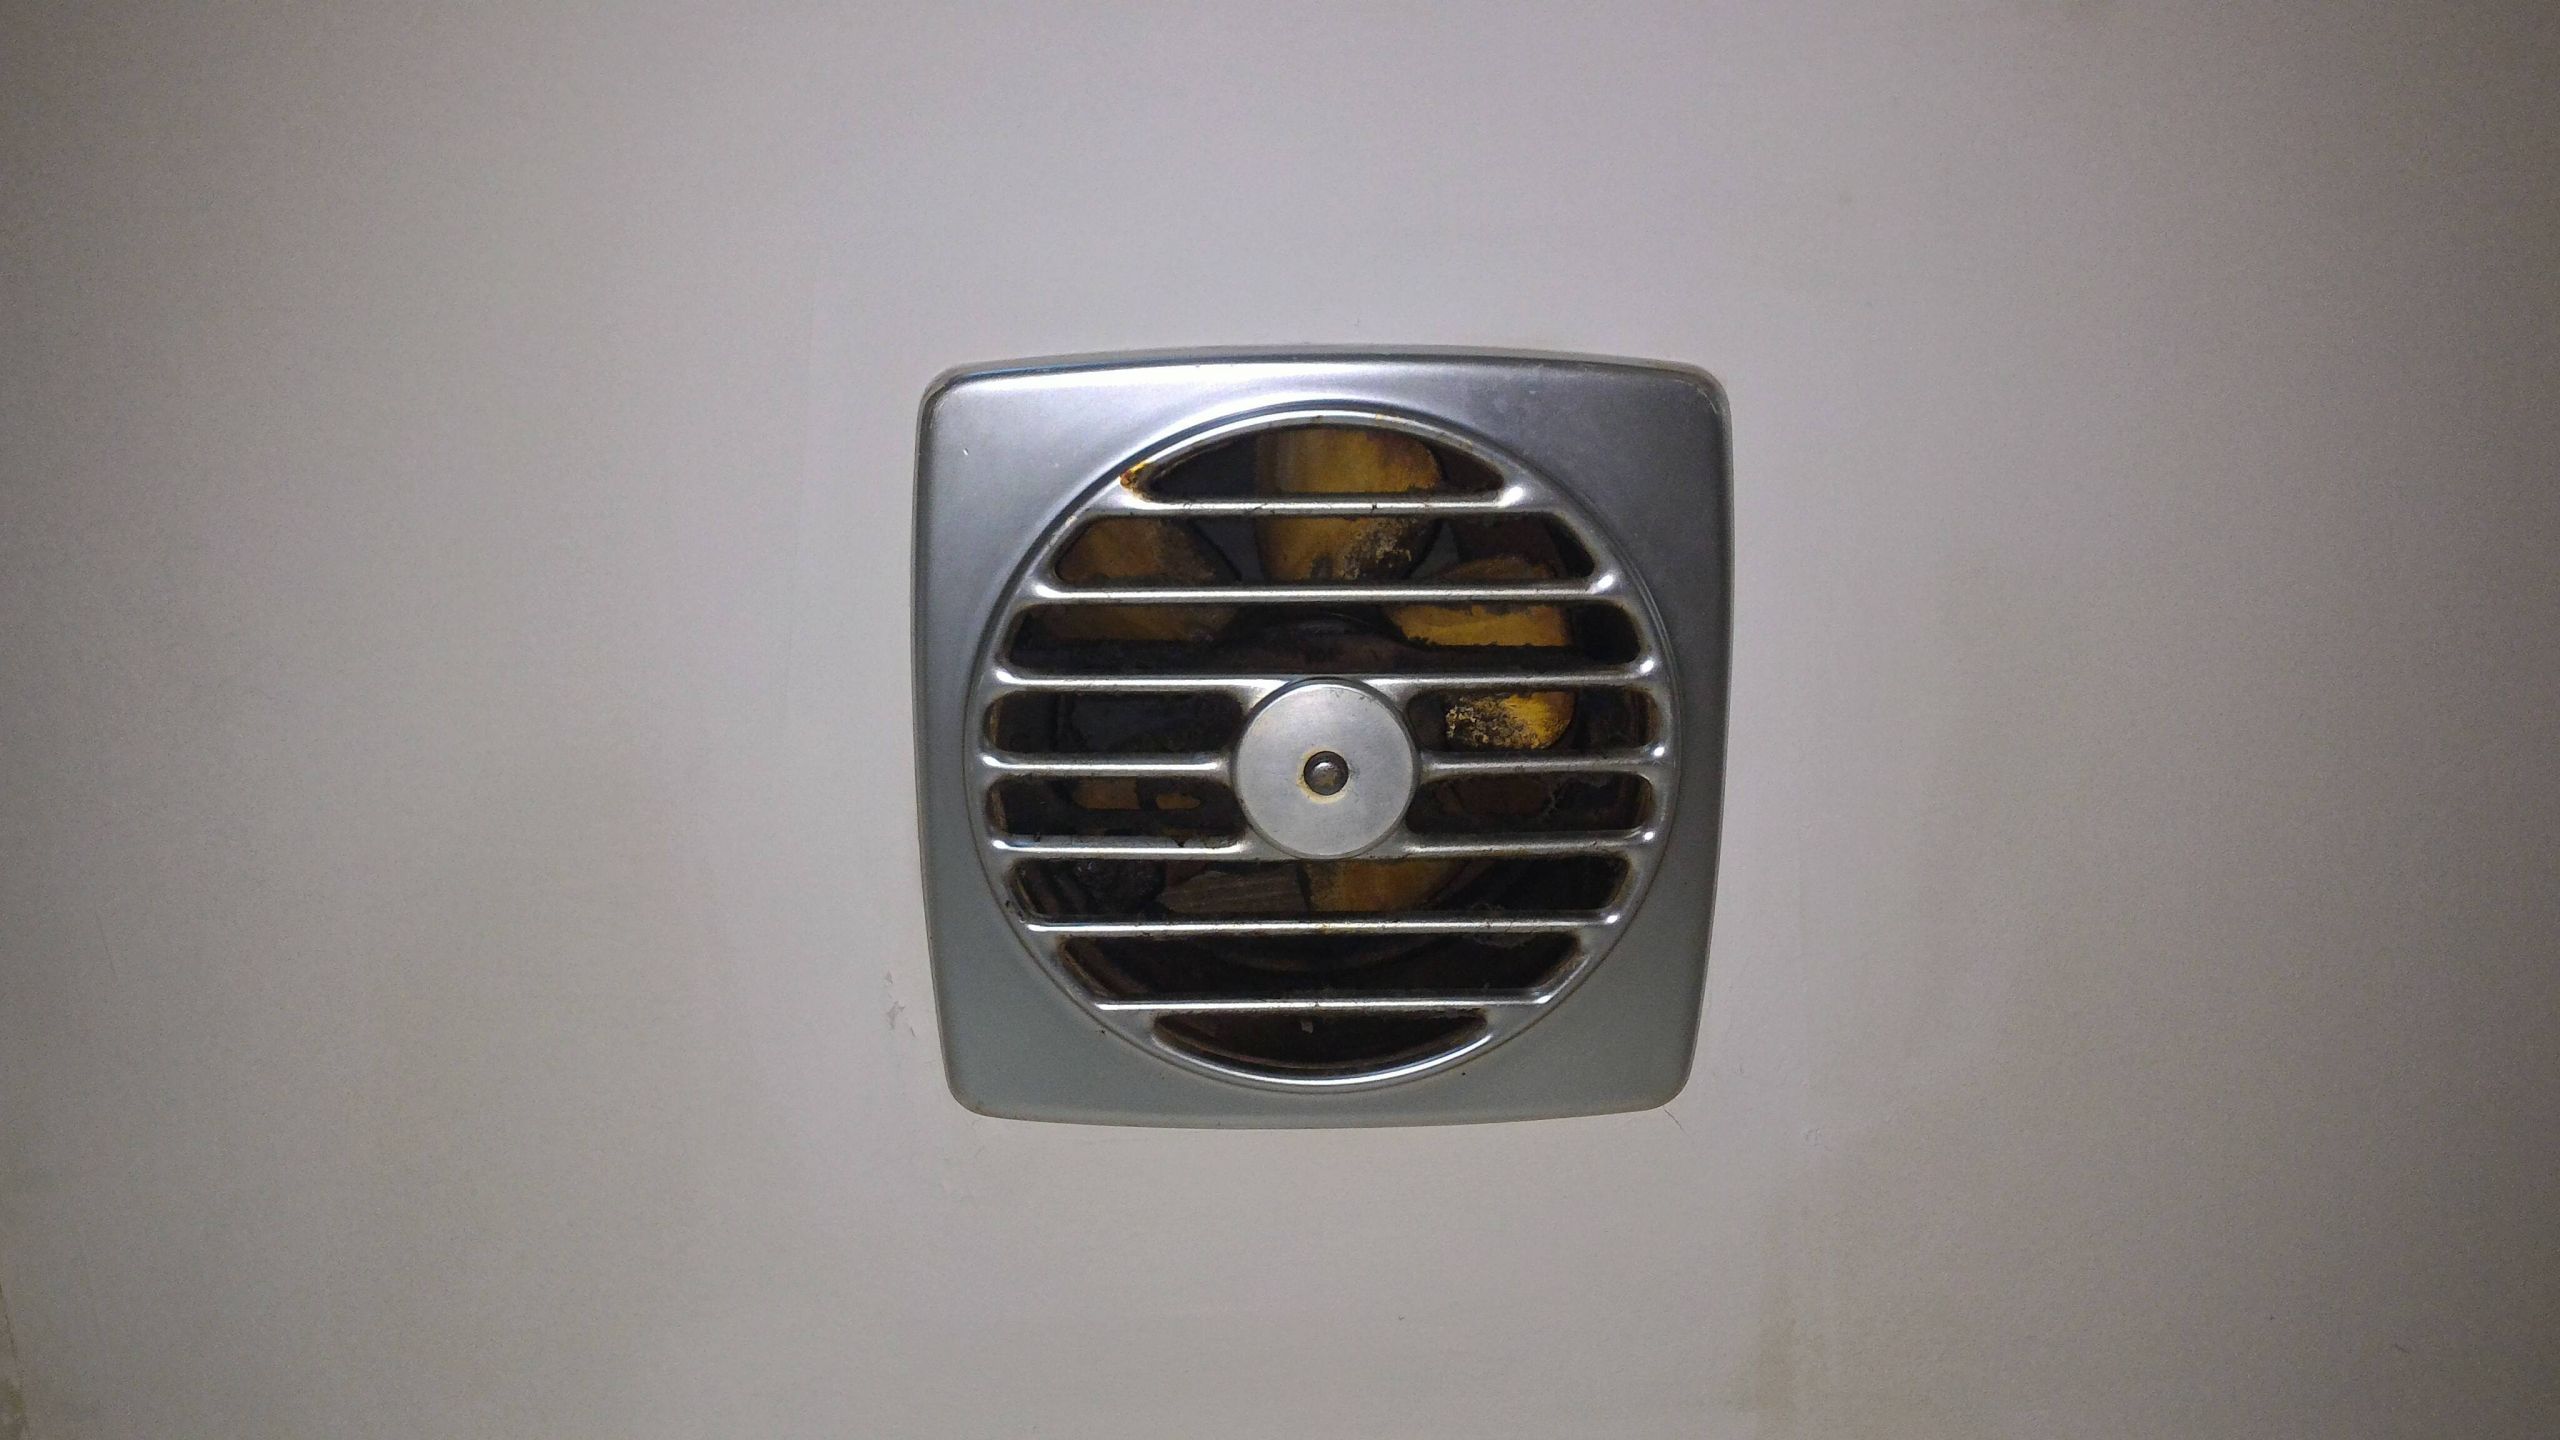 Wall Exhaust Fan Kitchen
 replacement Ceiling exhaust fan in kitchen Home